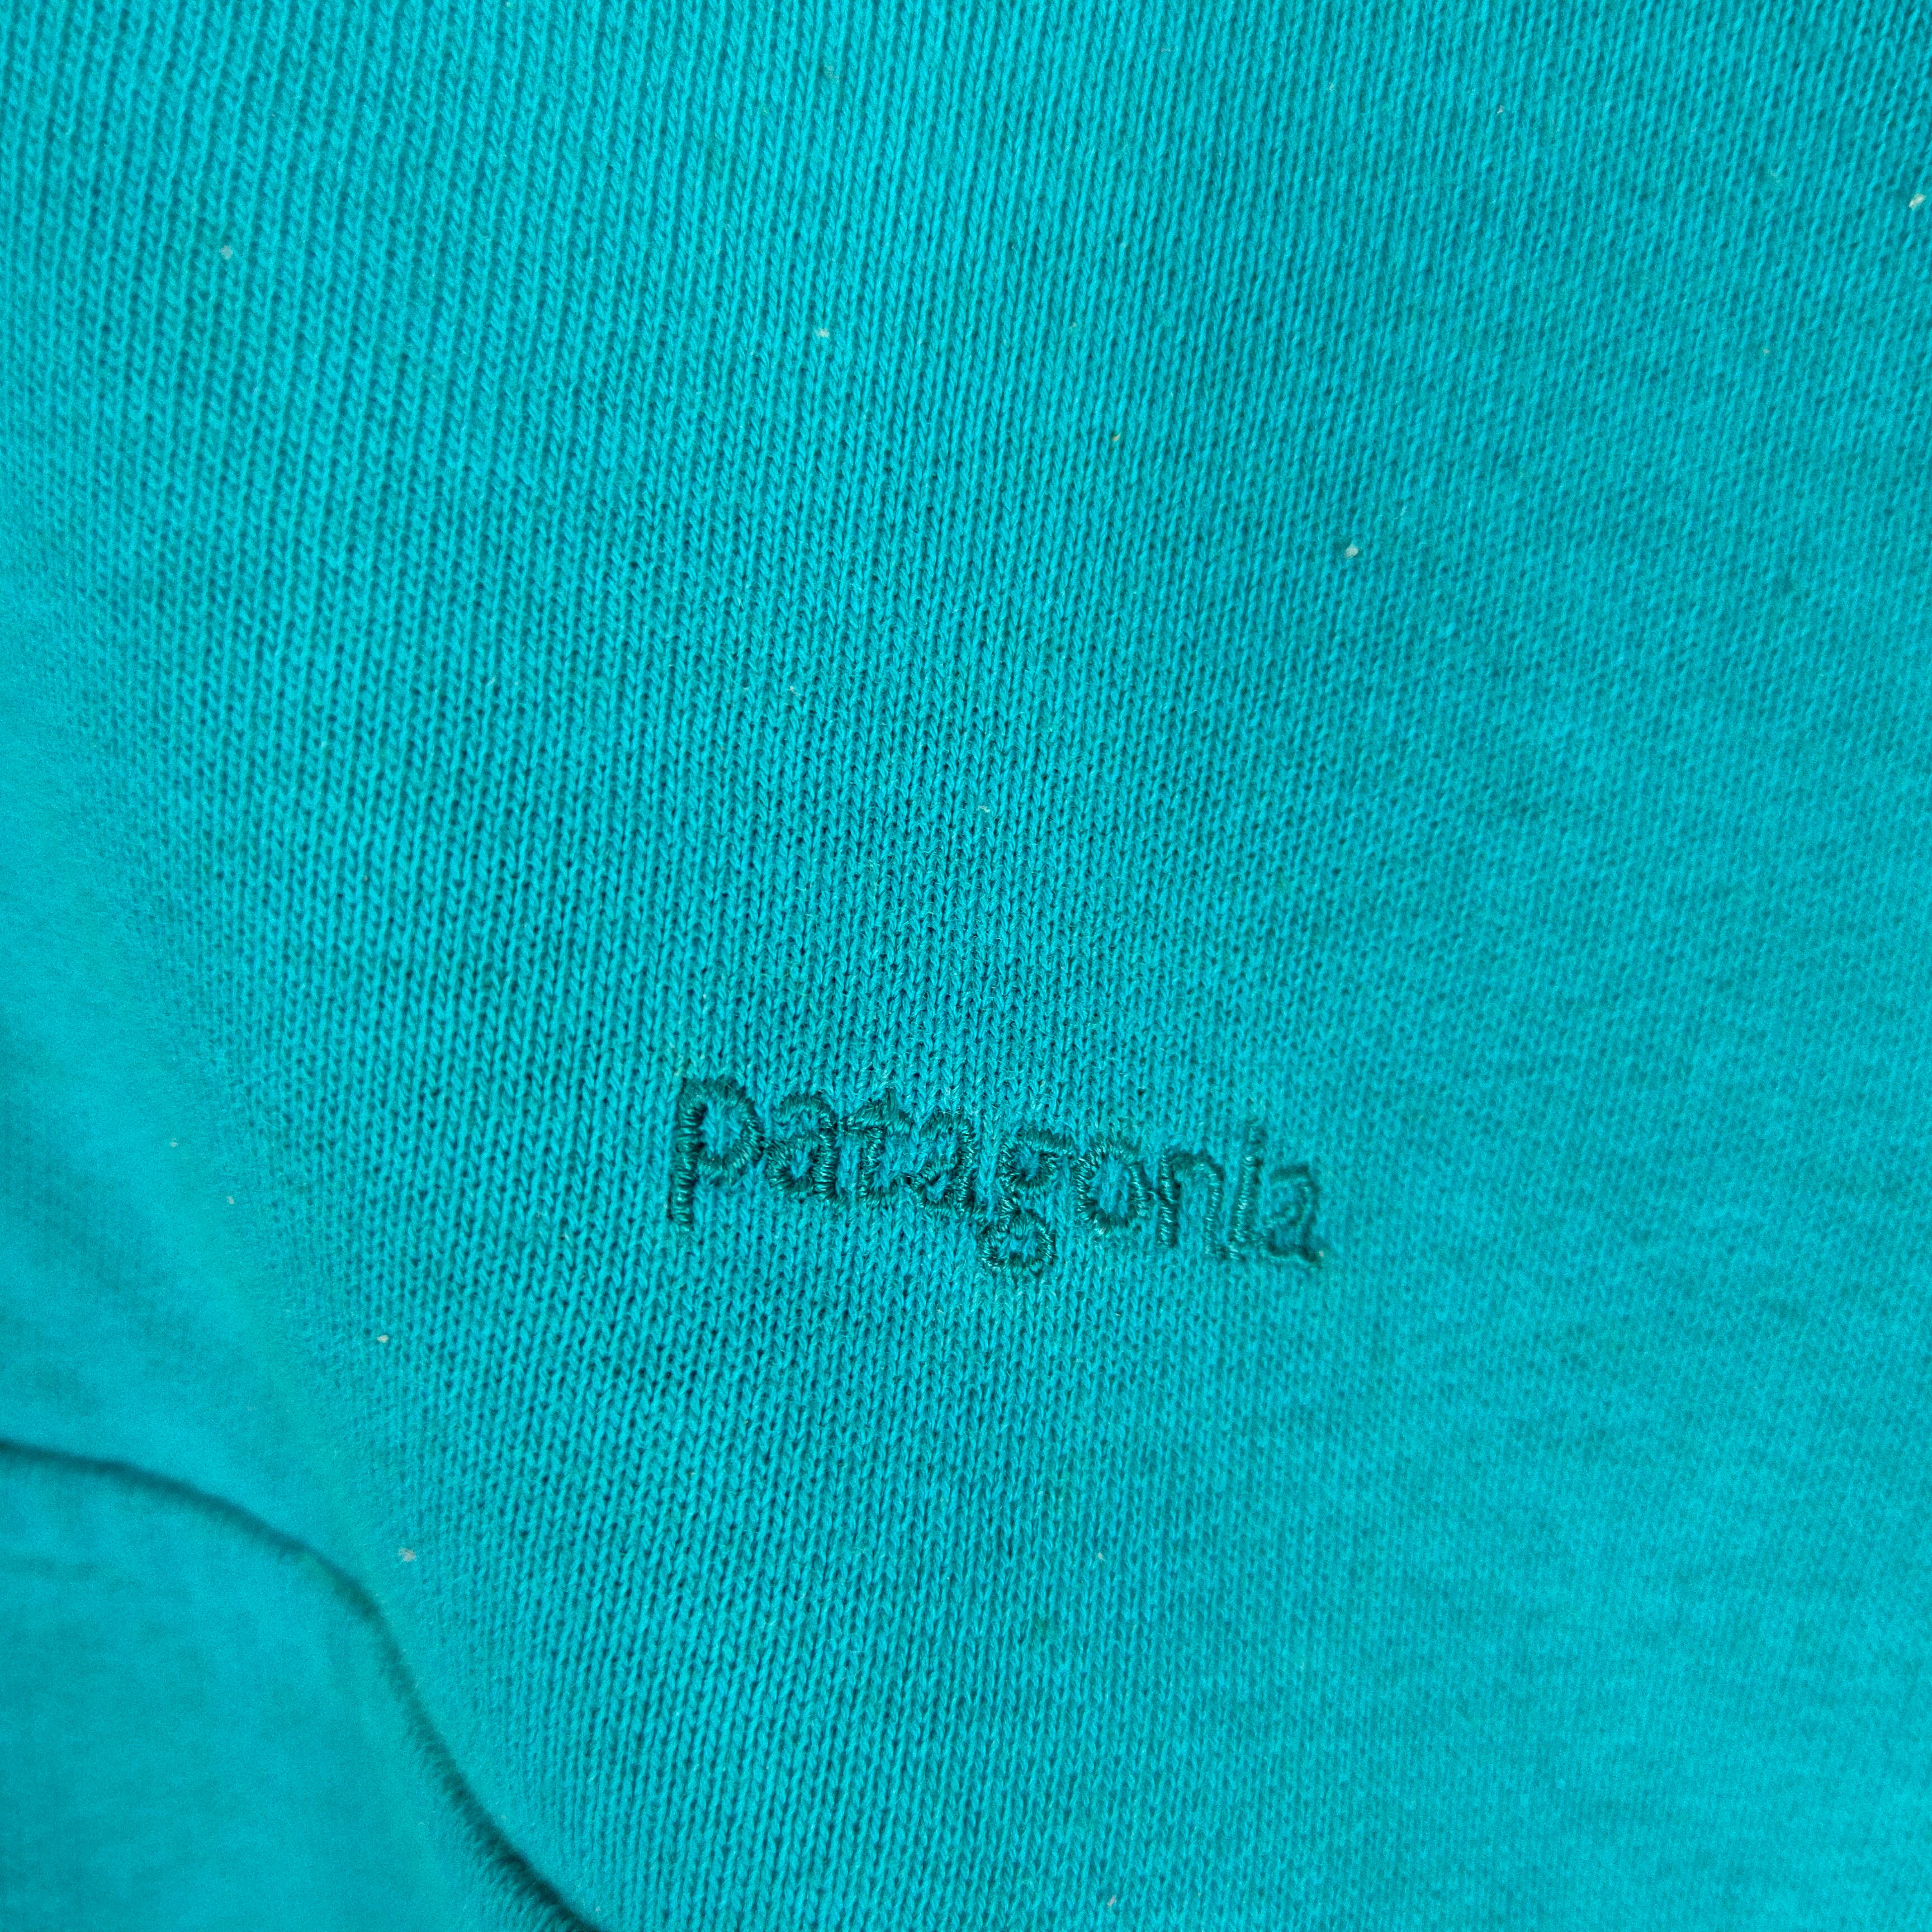 VINTAGE PATAGONIA Small Embroidery SpellOut Polo Sweatshirt - 2